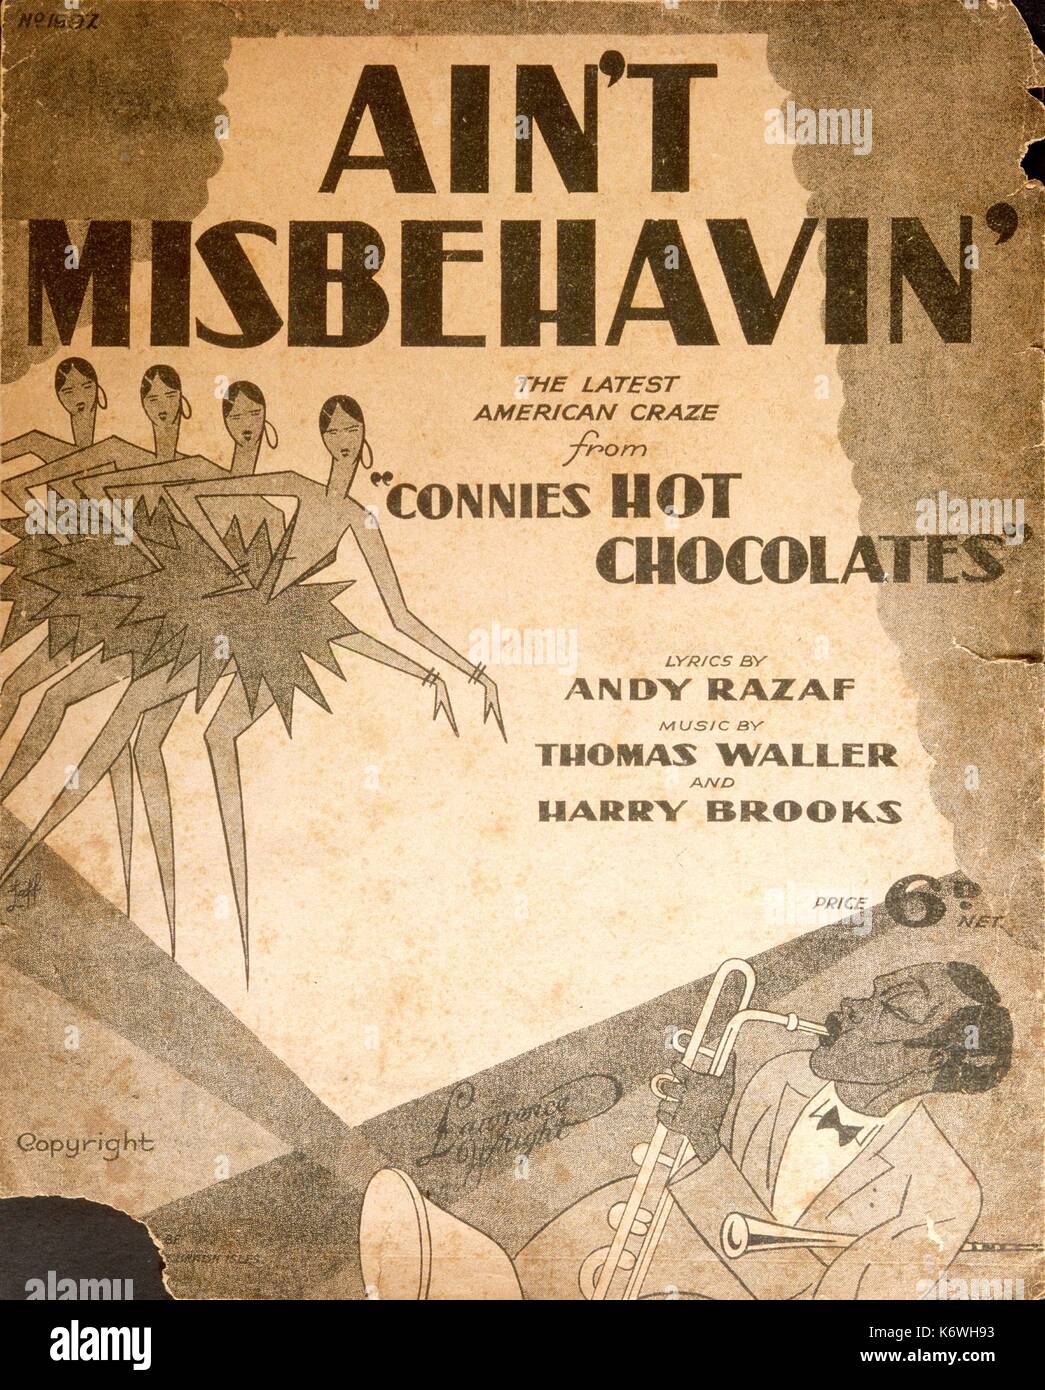 Ain't Misbehavin' 'The latest American craze from Connies Hot Chocolates. Craze for 'Connie's Hot Chocolates' Published New York, Mills Music, 1929. (Saxophone  Dance) score cover. Lyrics by  Andy Razaf, music by thomas Waller and Harry Brooks Stock Photo